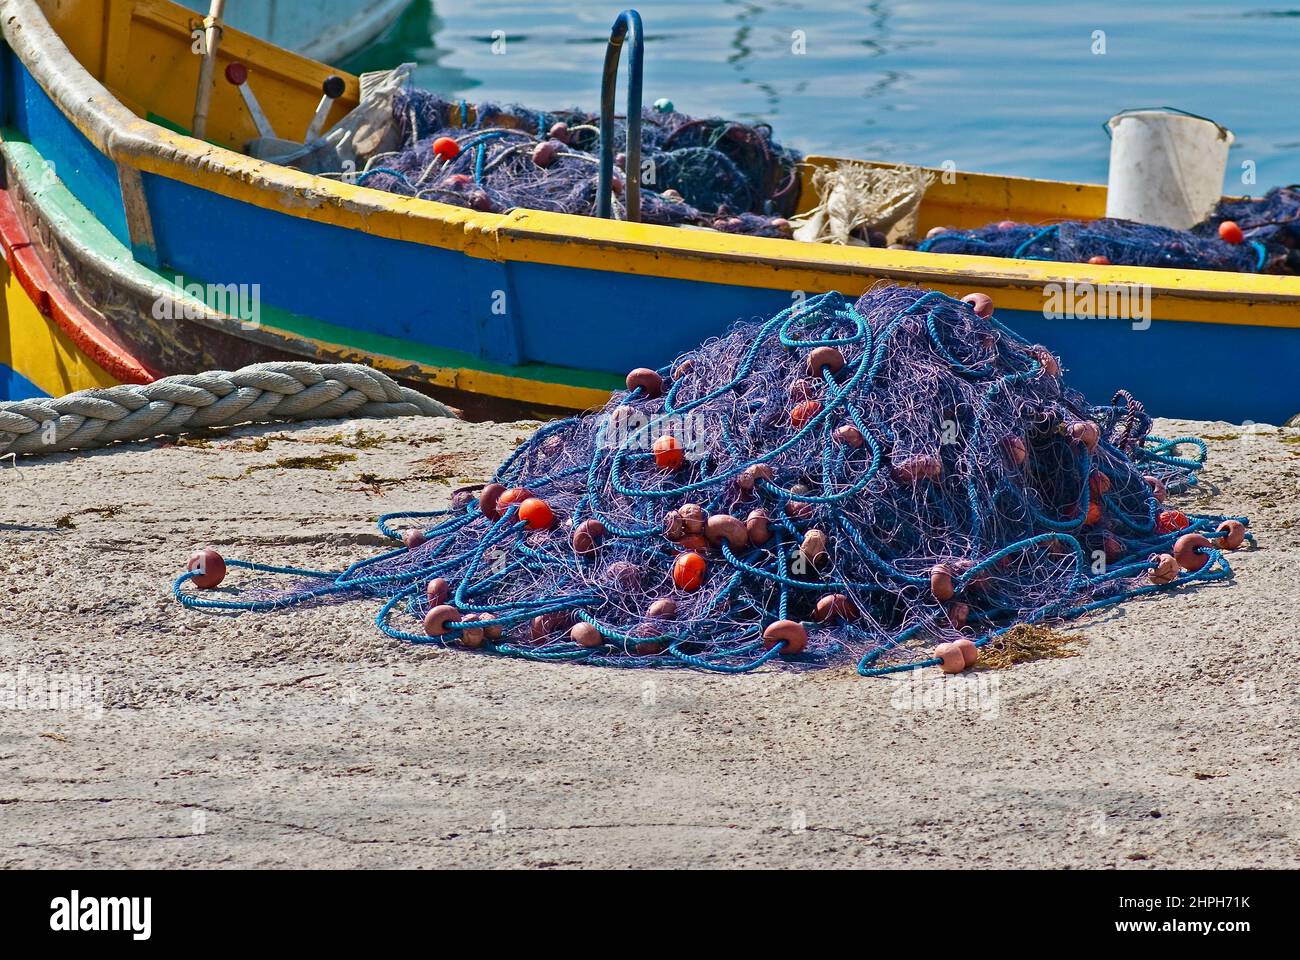 Blue fishing net in front of a richly colored boat on the island Malta. Stock Photo